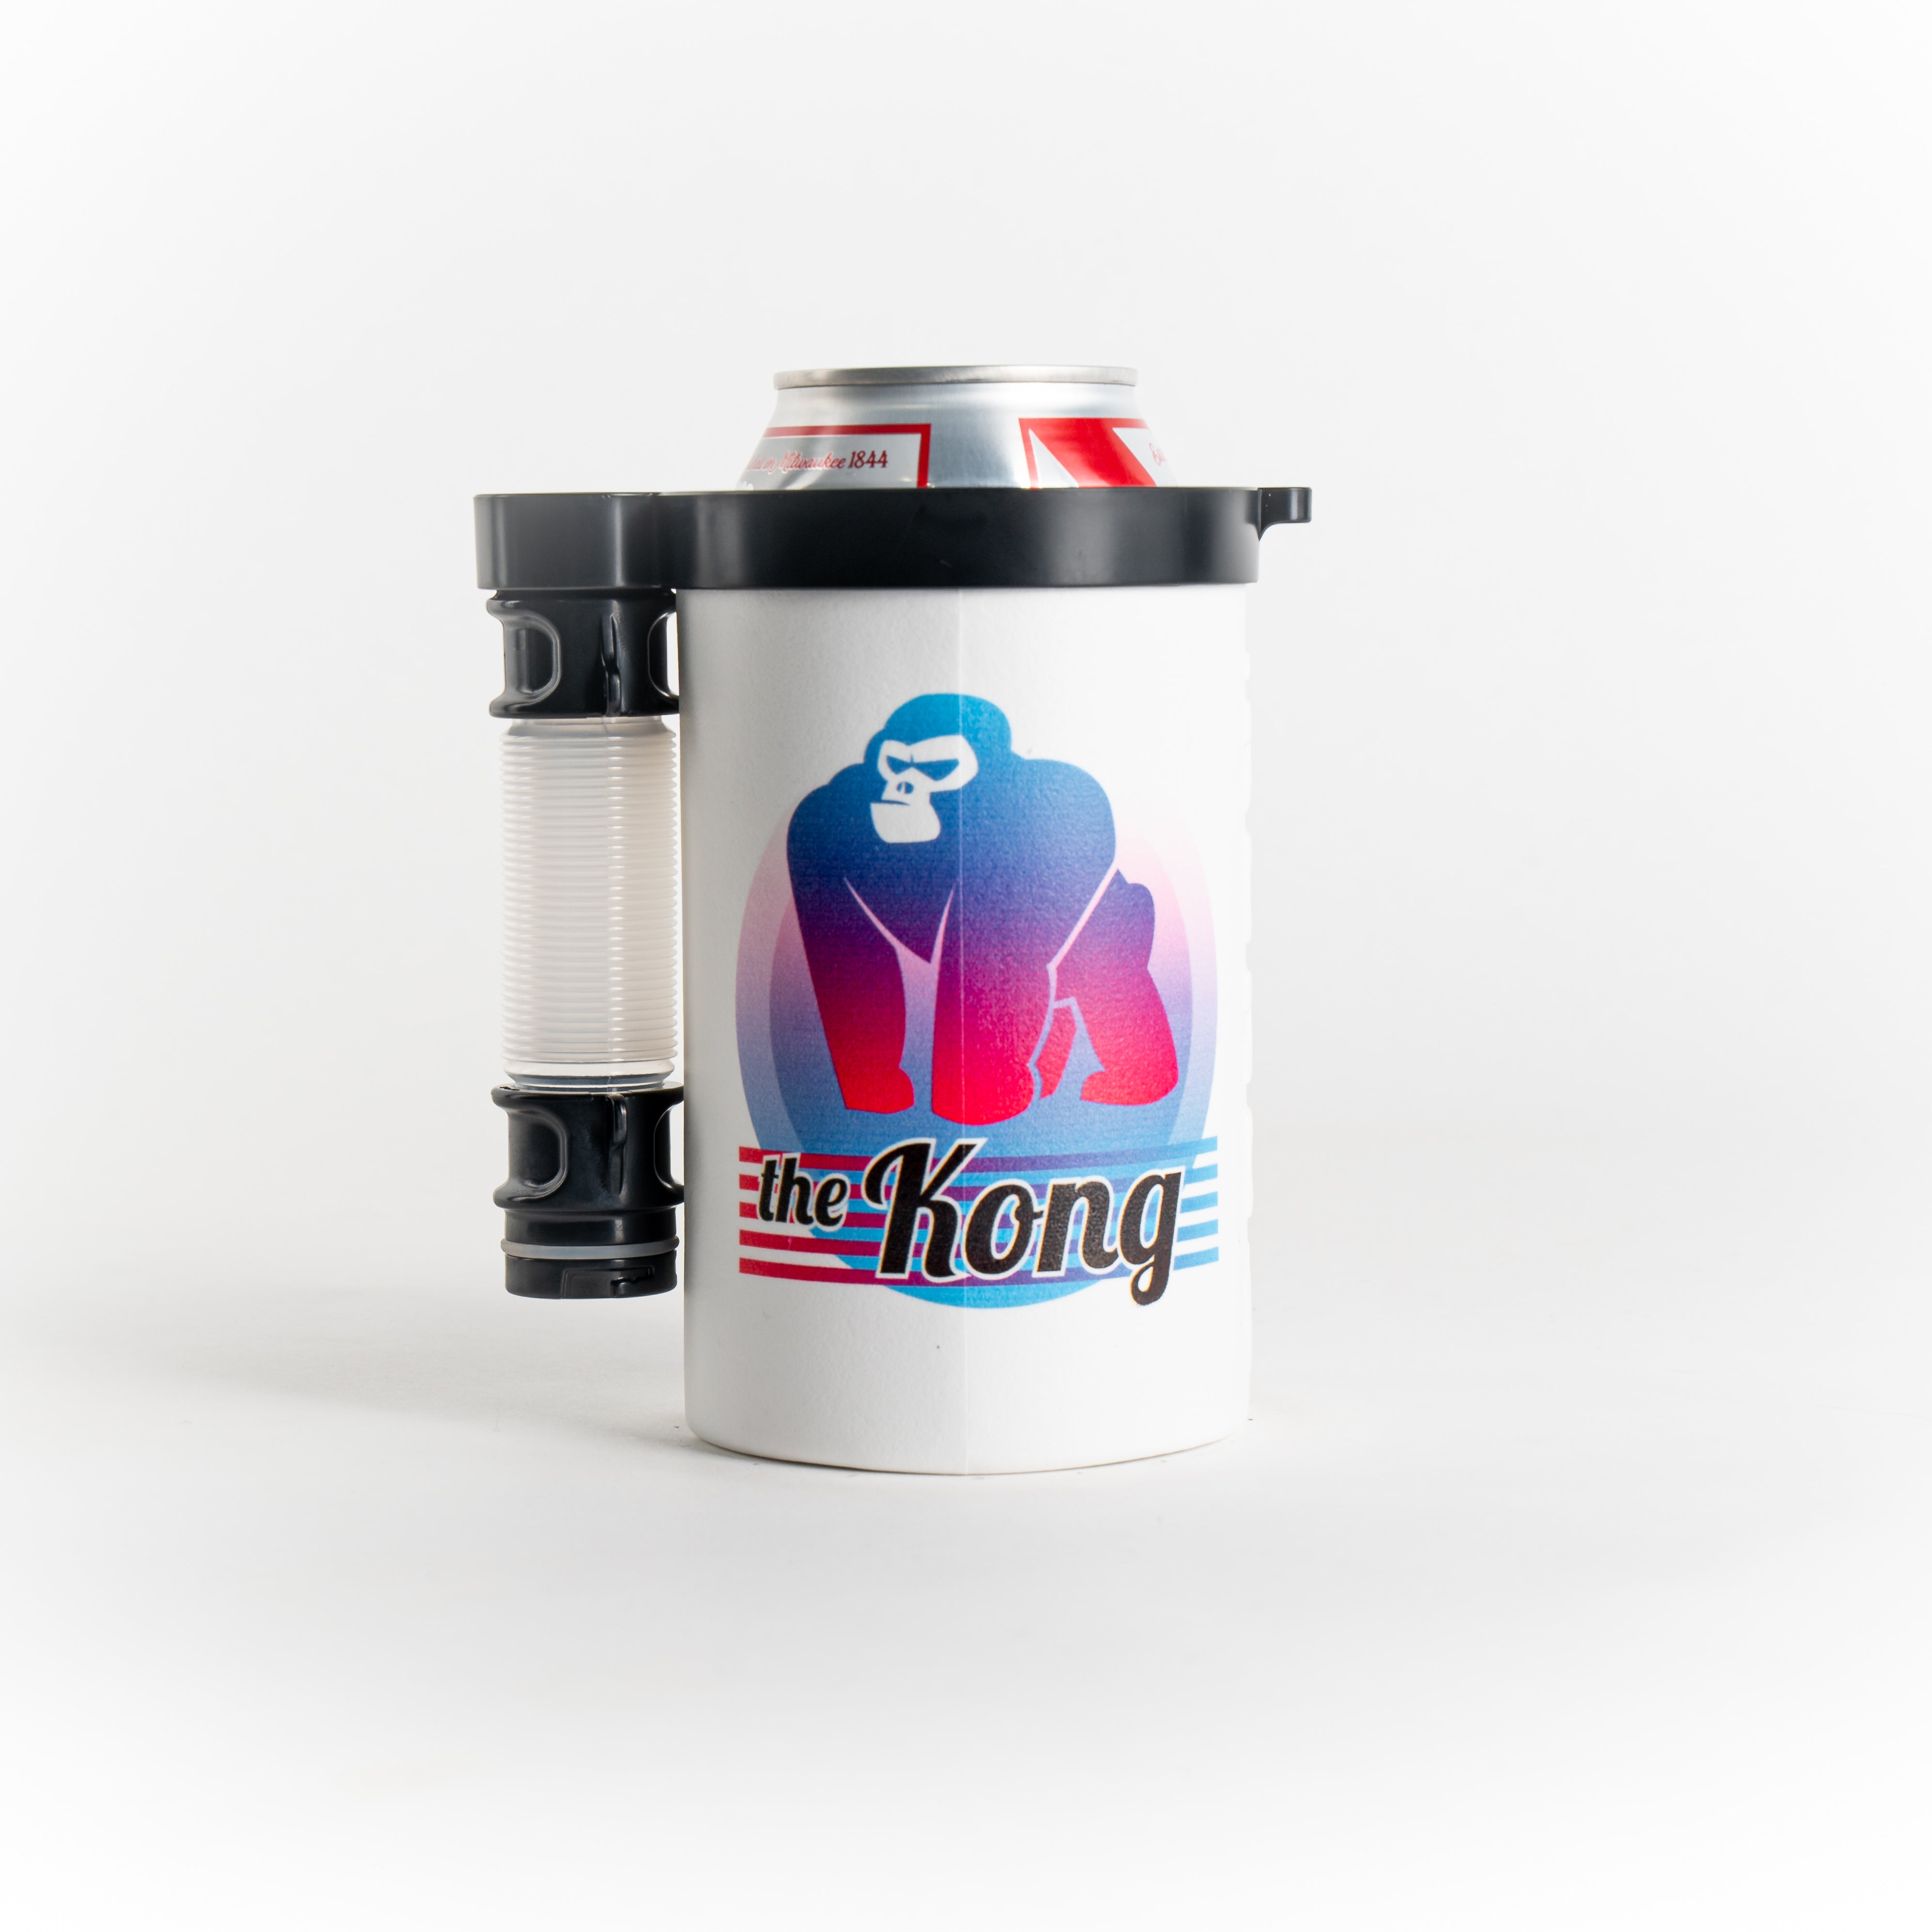 The Kong 2.0. A Portable Can or Bottle Cooler/Cup with A Detachable,  Expandable, Hose to Funnel Your Drink. (Black)